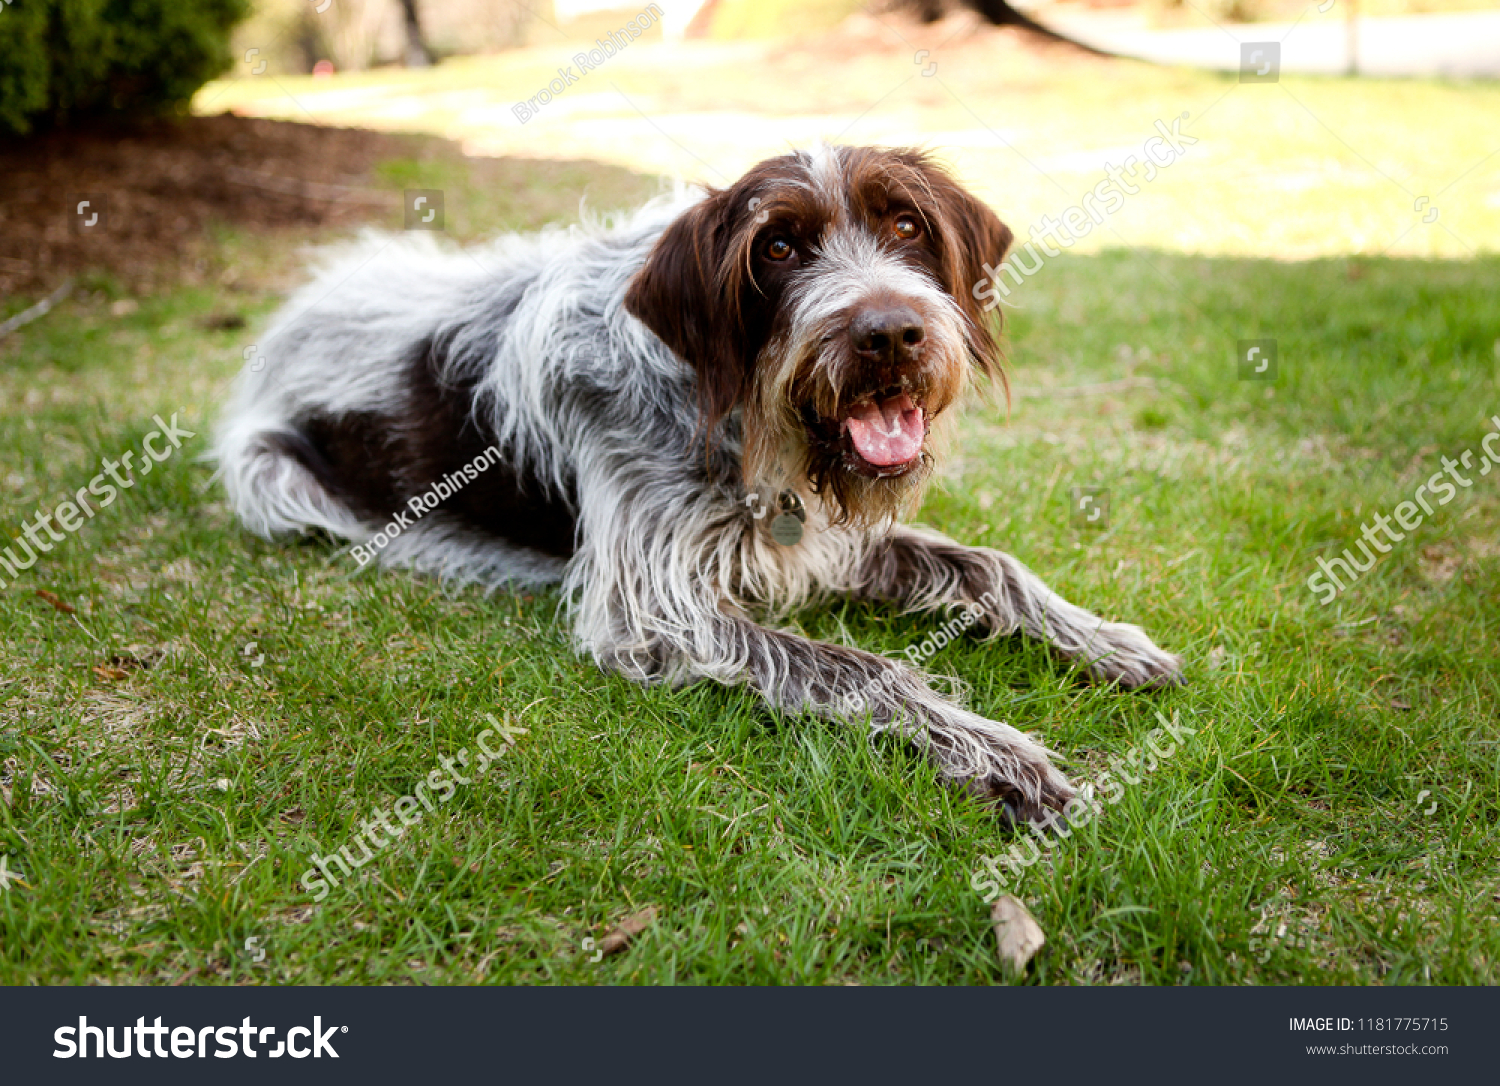 Wirehaired Pointing Griffon Dog Relaxing in the Cool Green Grass #1181775715